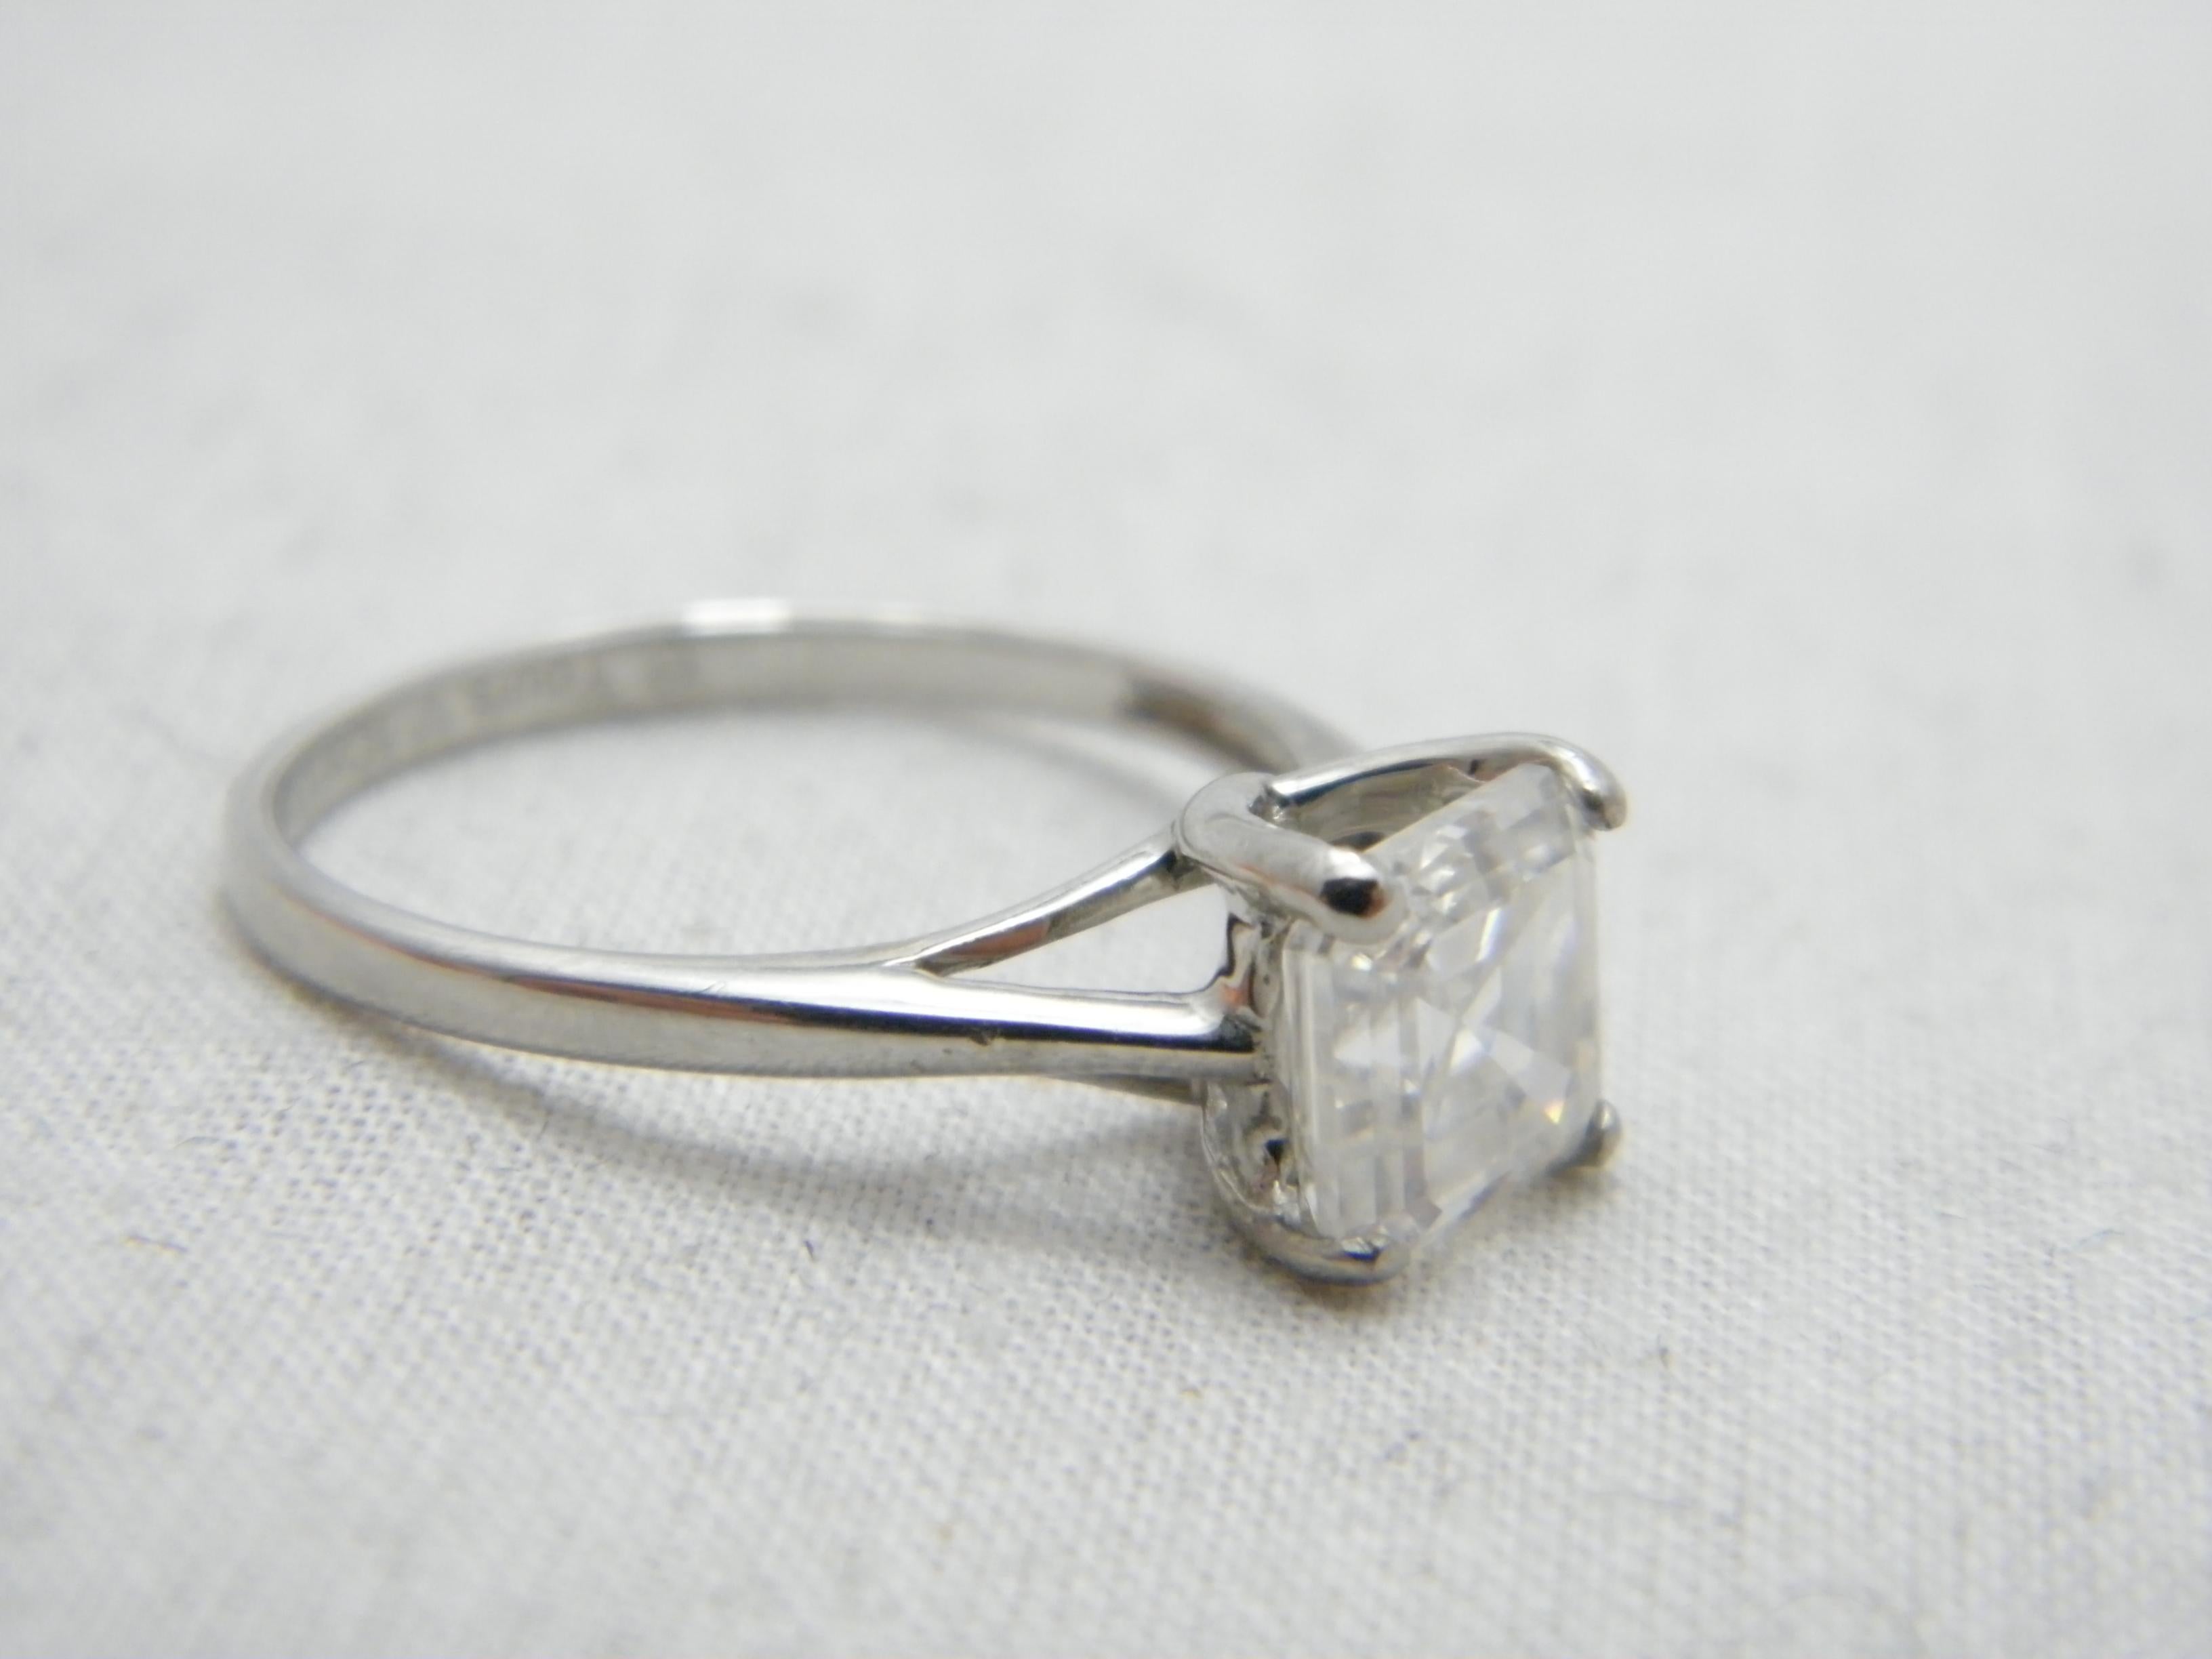 Vintage 14ct White Gold 2.75 Cttw Diamond Solitaire Engagement Ring Size Q 8.25 In Good Condition For Sale In Camelford, GB